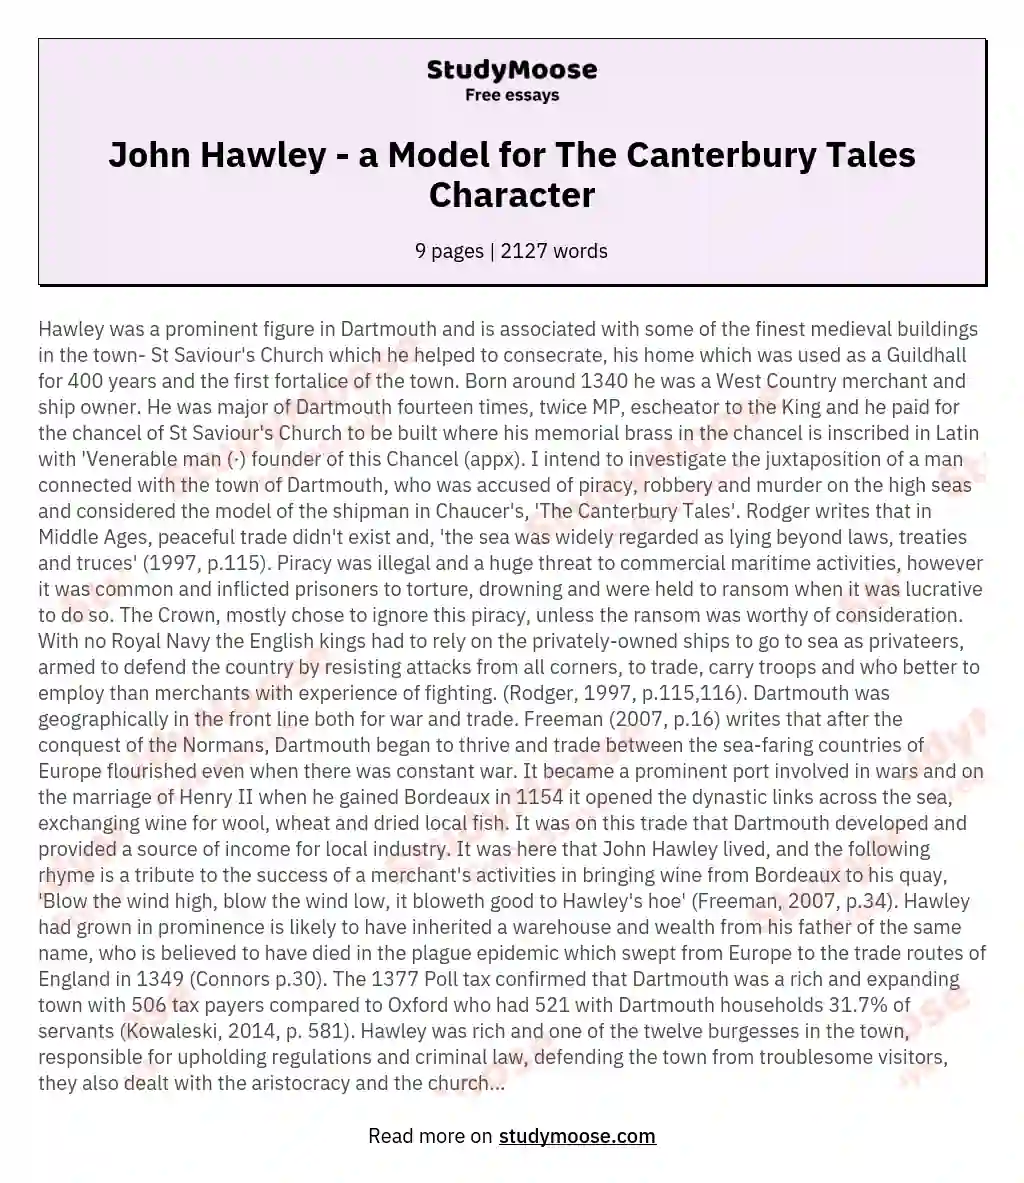 John Hawley - a Model for The Canterbury Tales Character